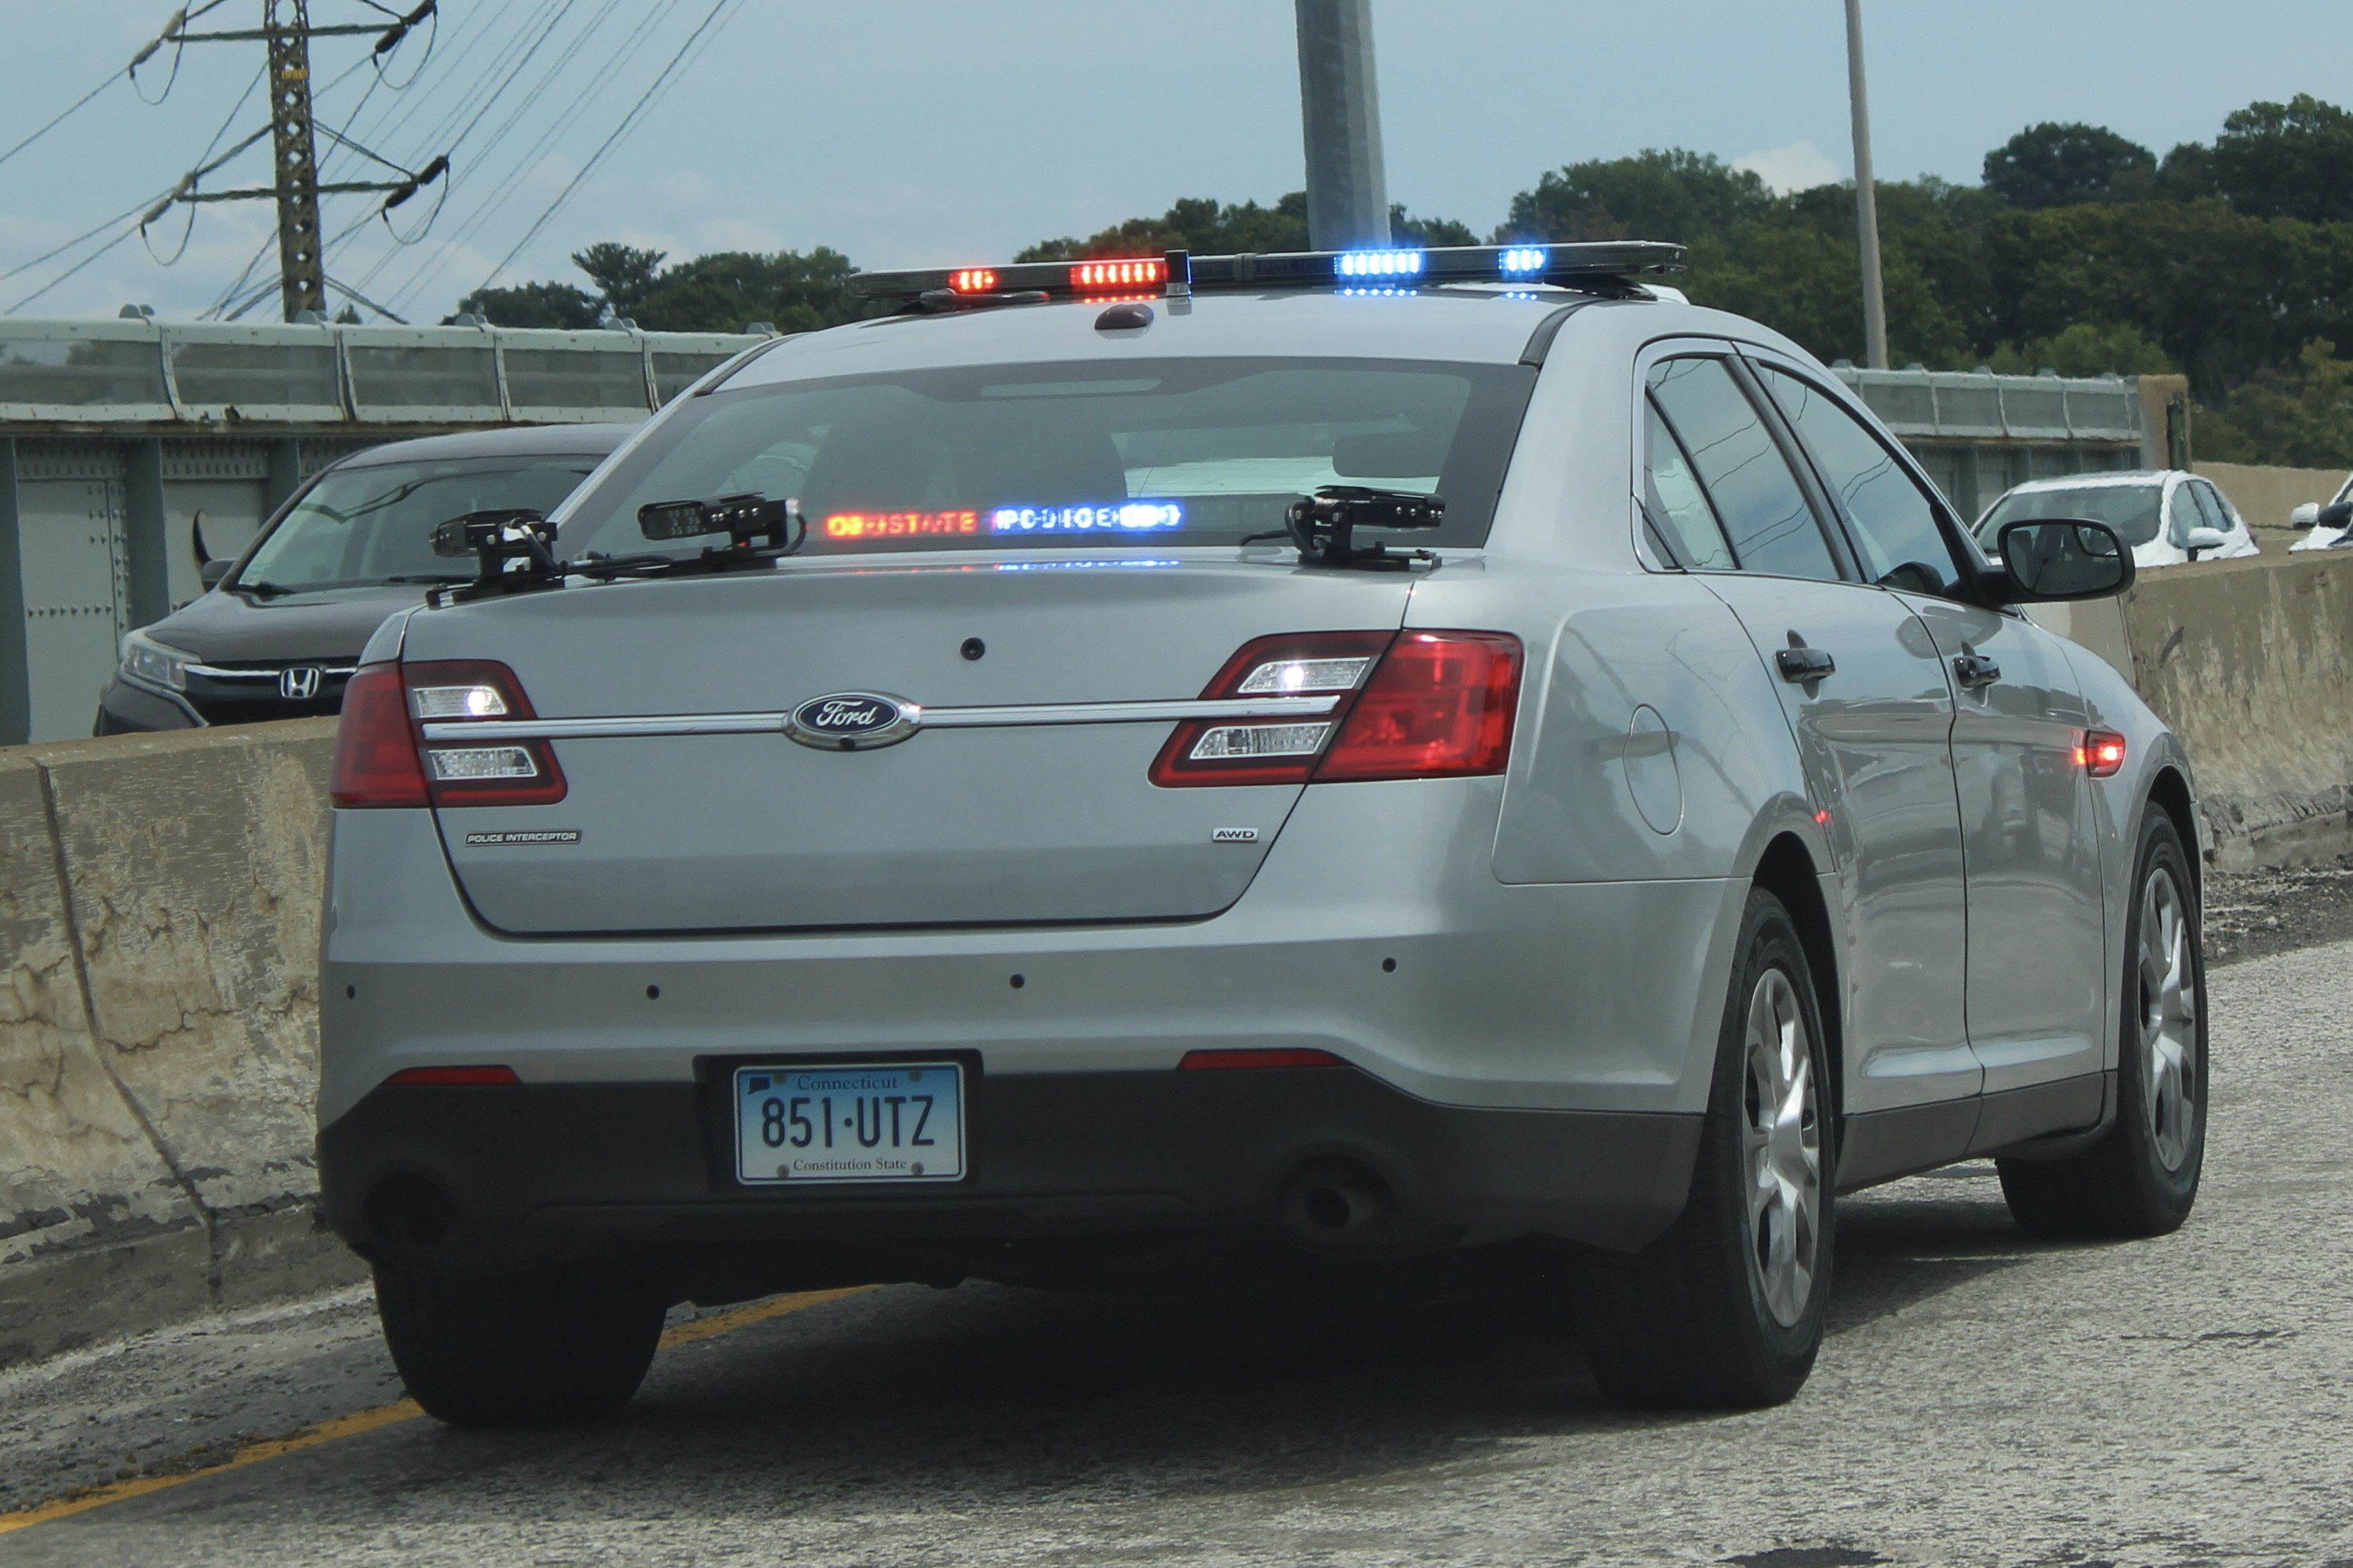 A photo  of Connecticut State Police
            Cruiser 851, a 2013-2019 Ford Police Interceptor Sedan             taken by @riemergencyvehicles